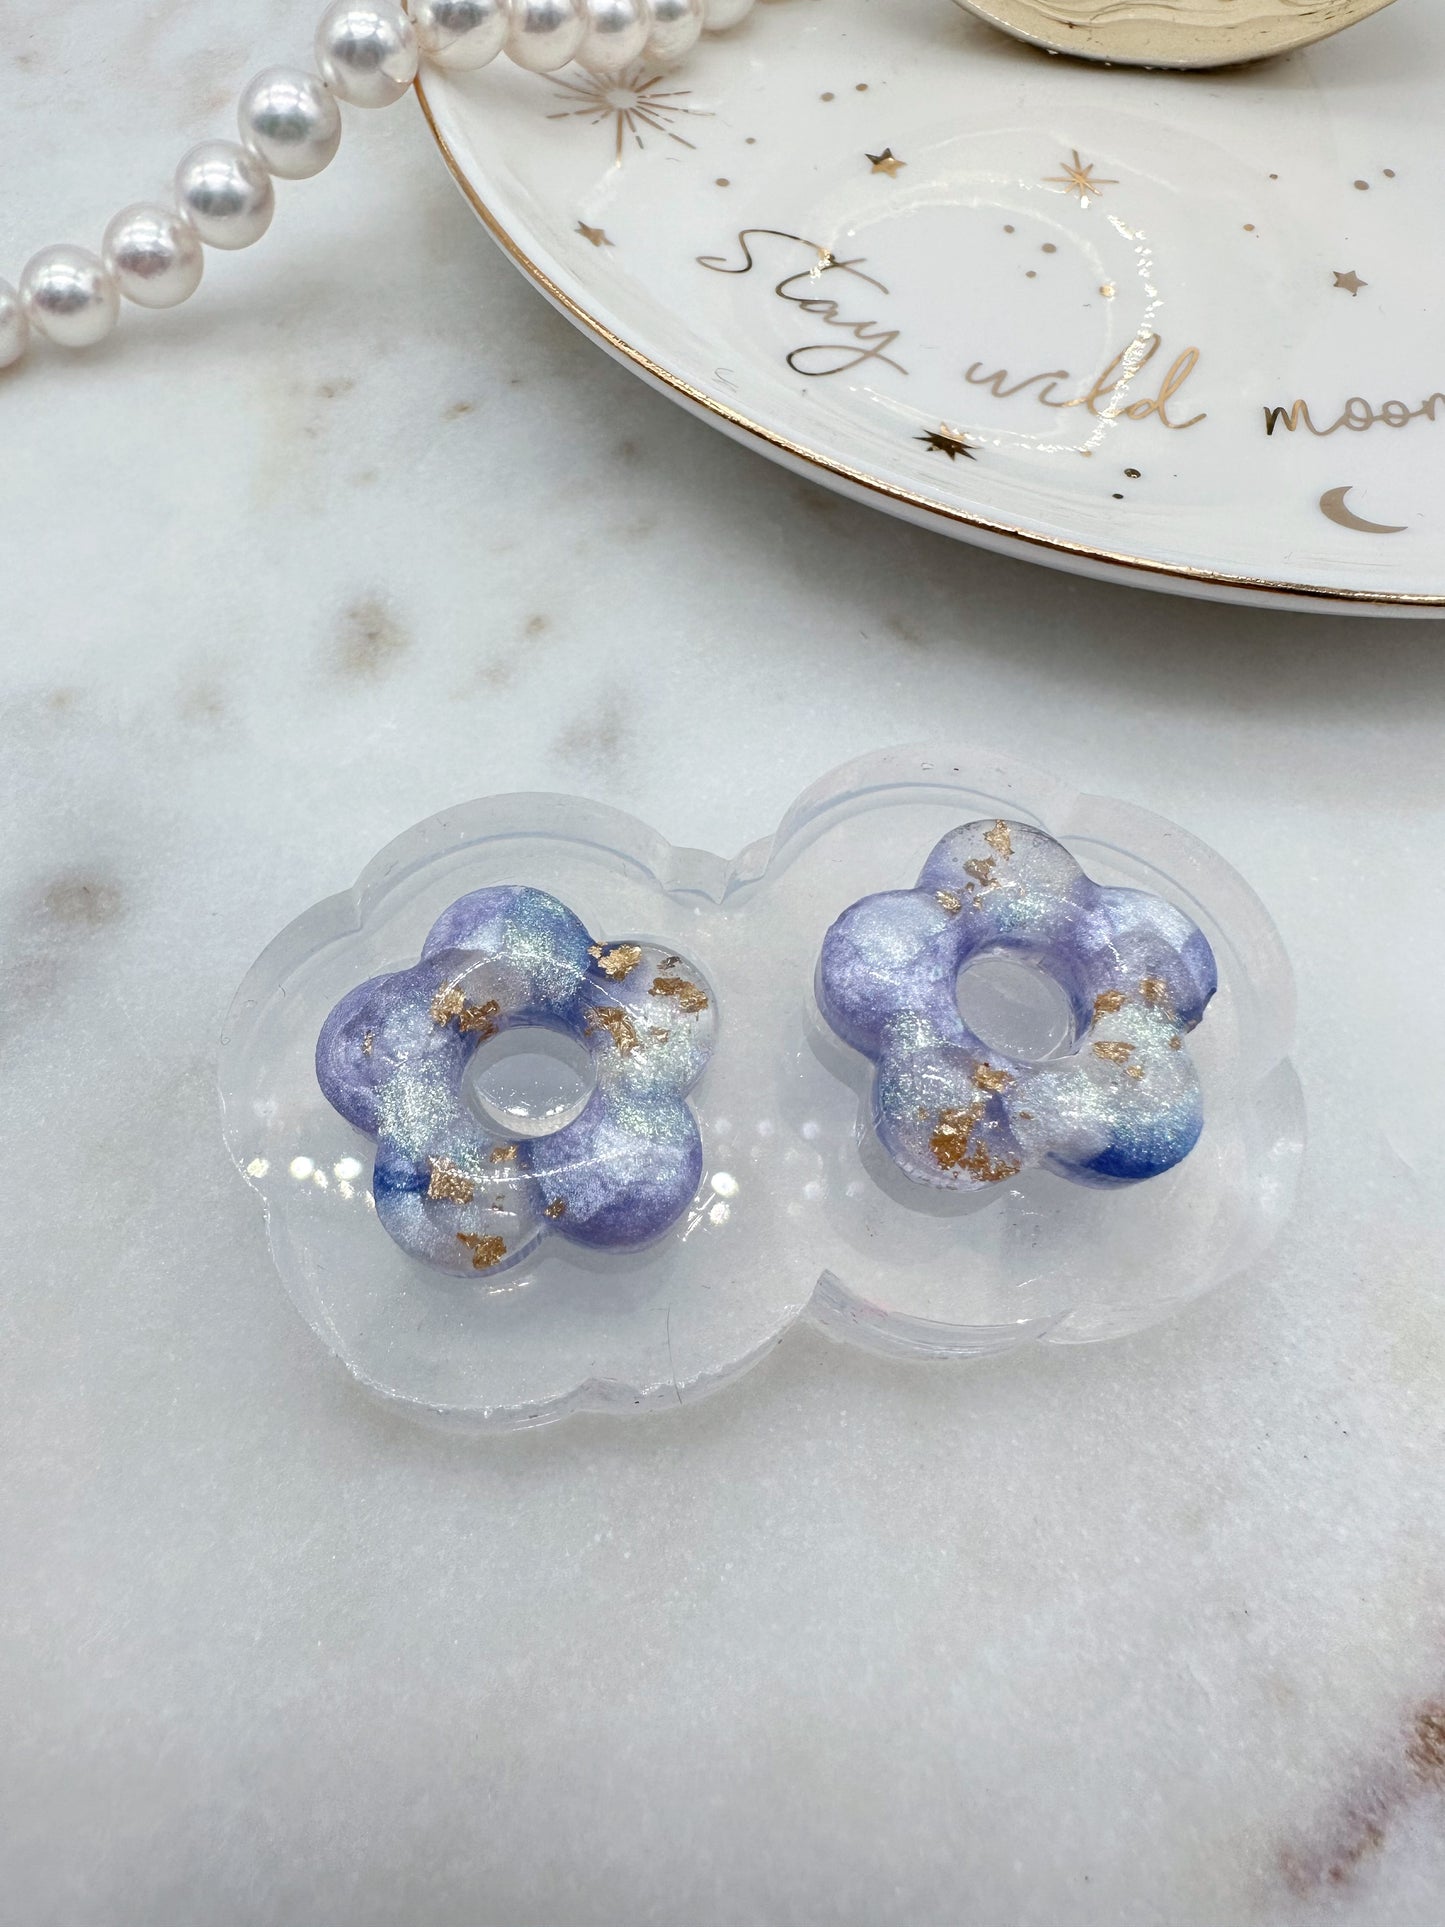 2cm Small Predomed Mary Quant Flower Stud Earring Mold